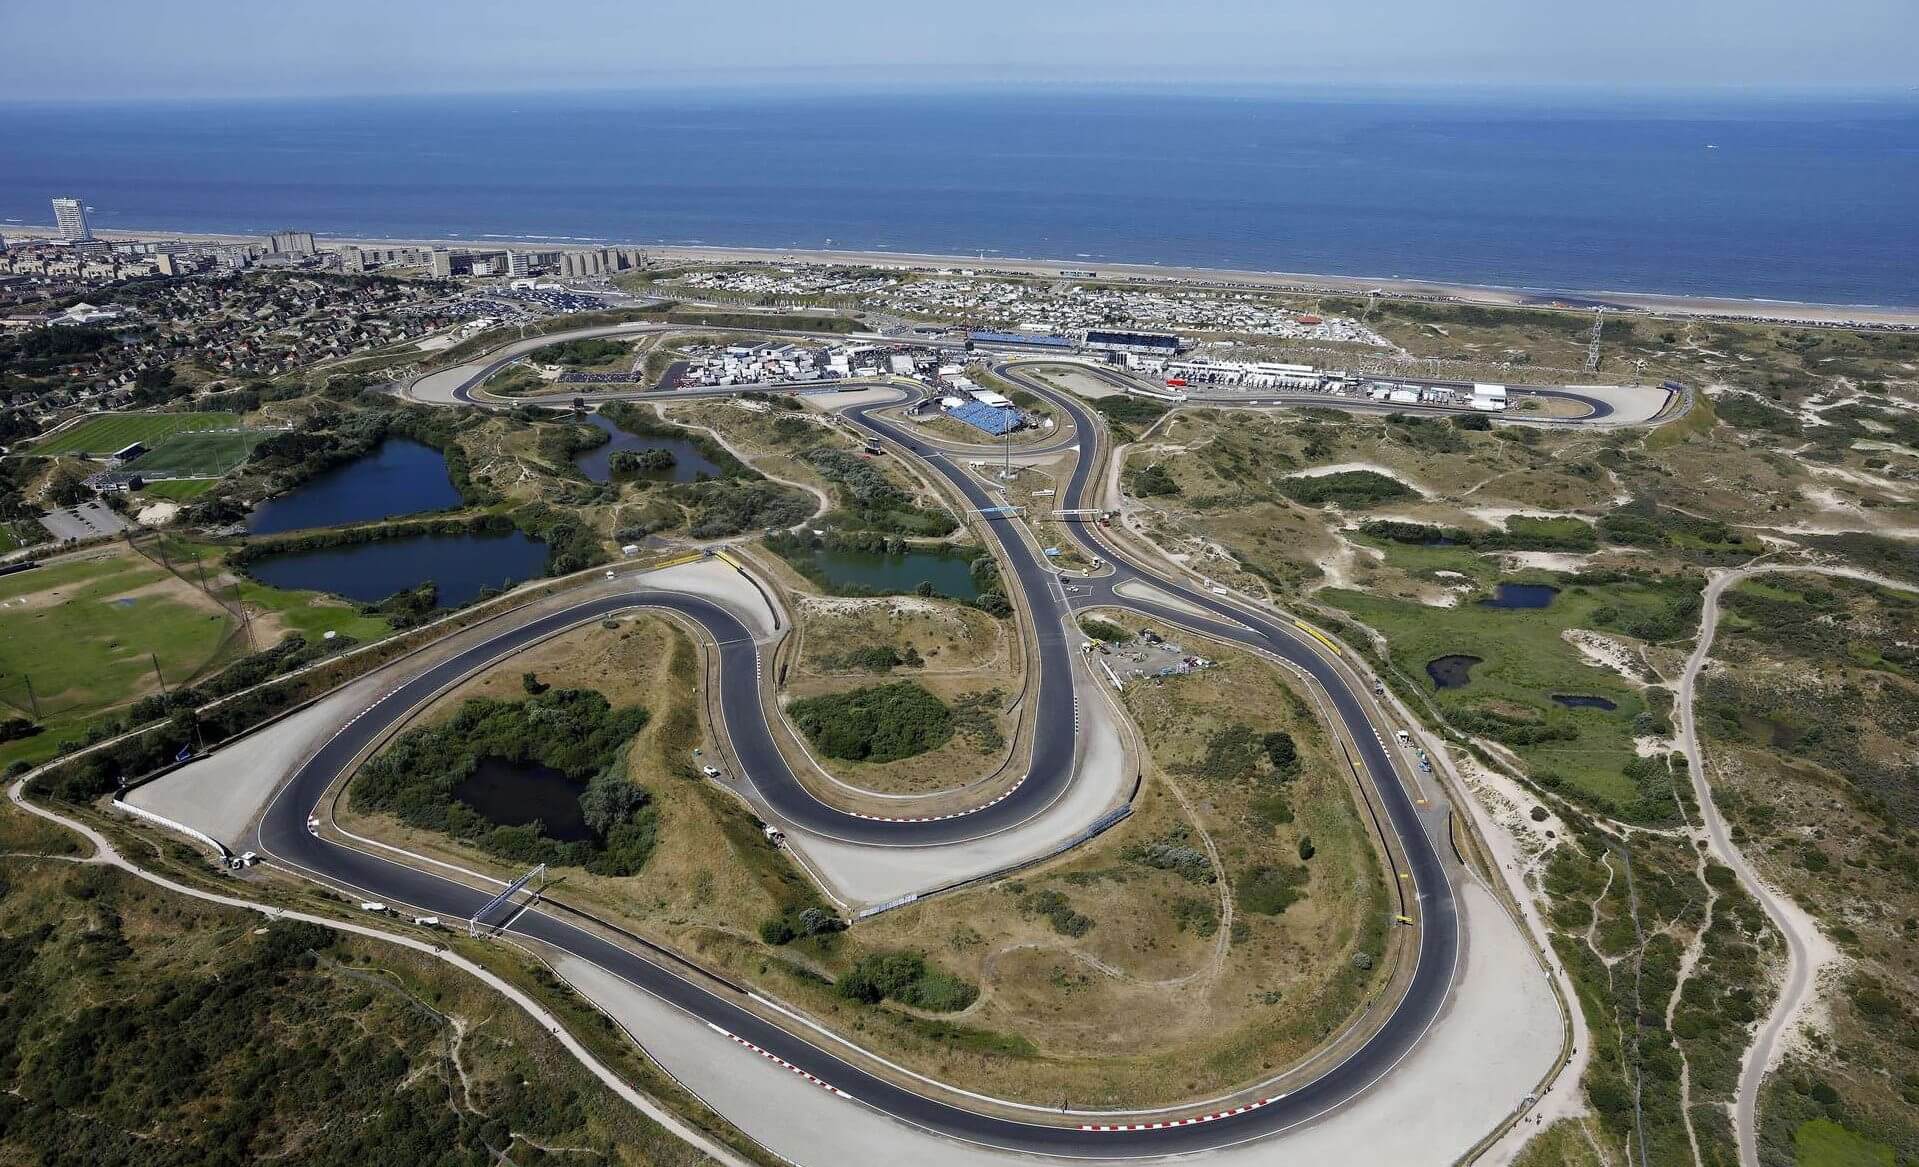 The Dutch race track from above